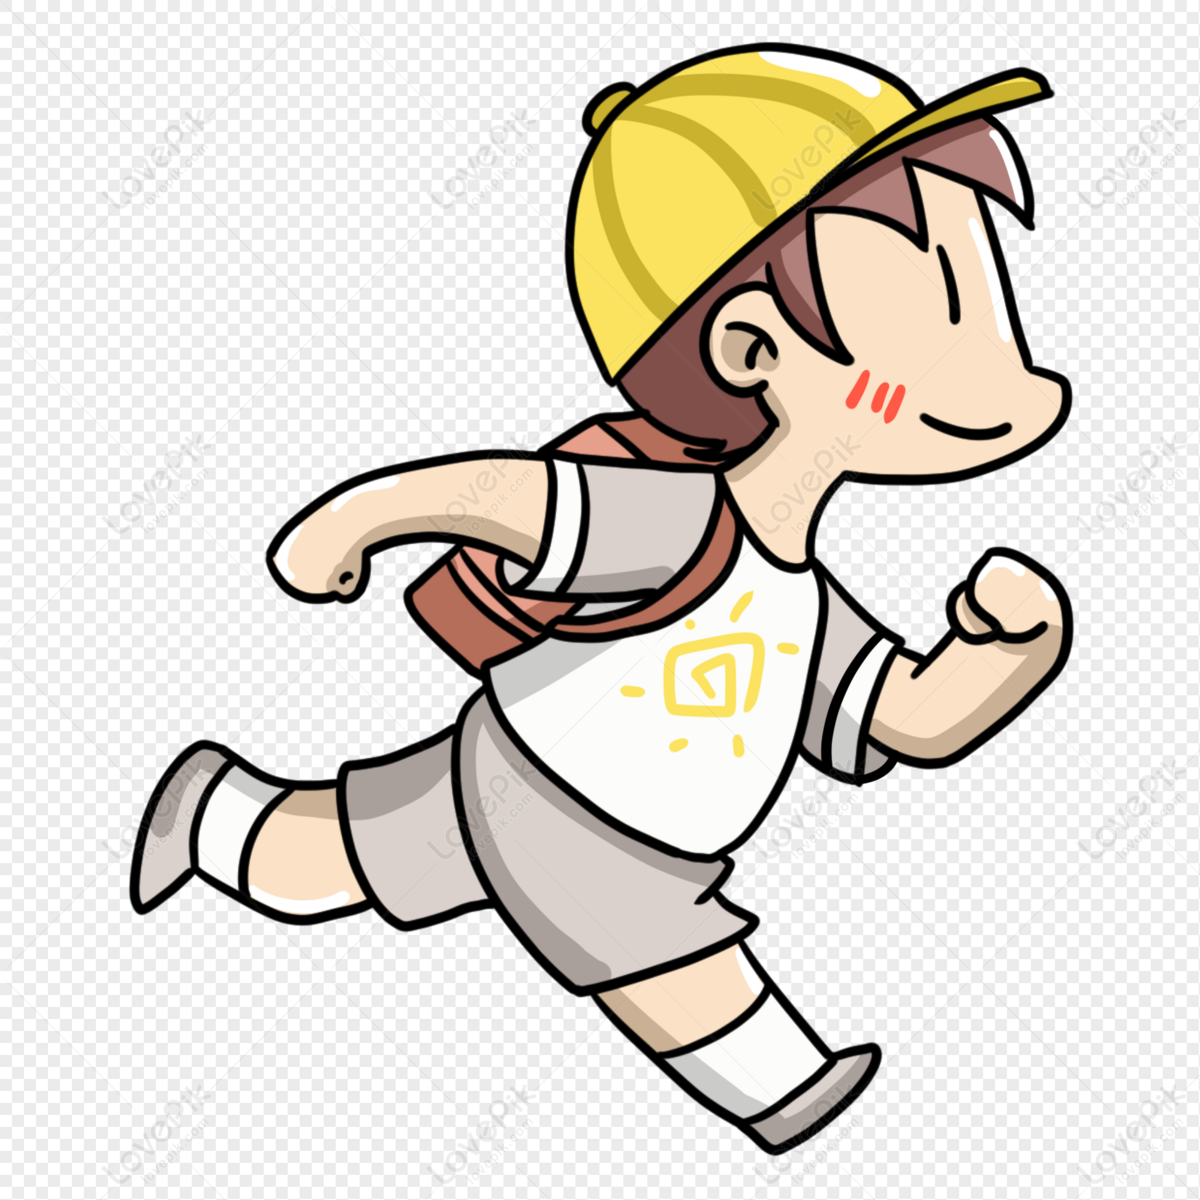 Running School Kids PNG Transparent Background And Clipart Image For Free  Download - Lovepik | 401424100